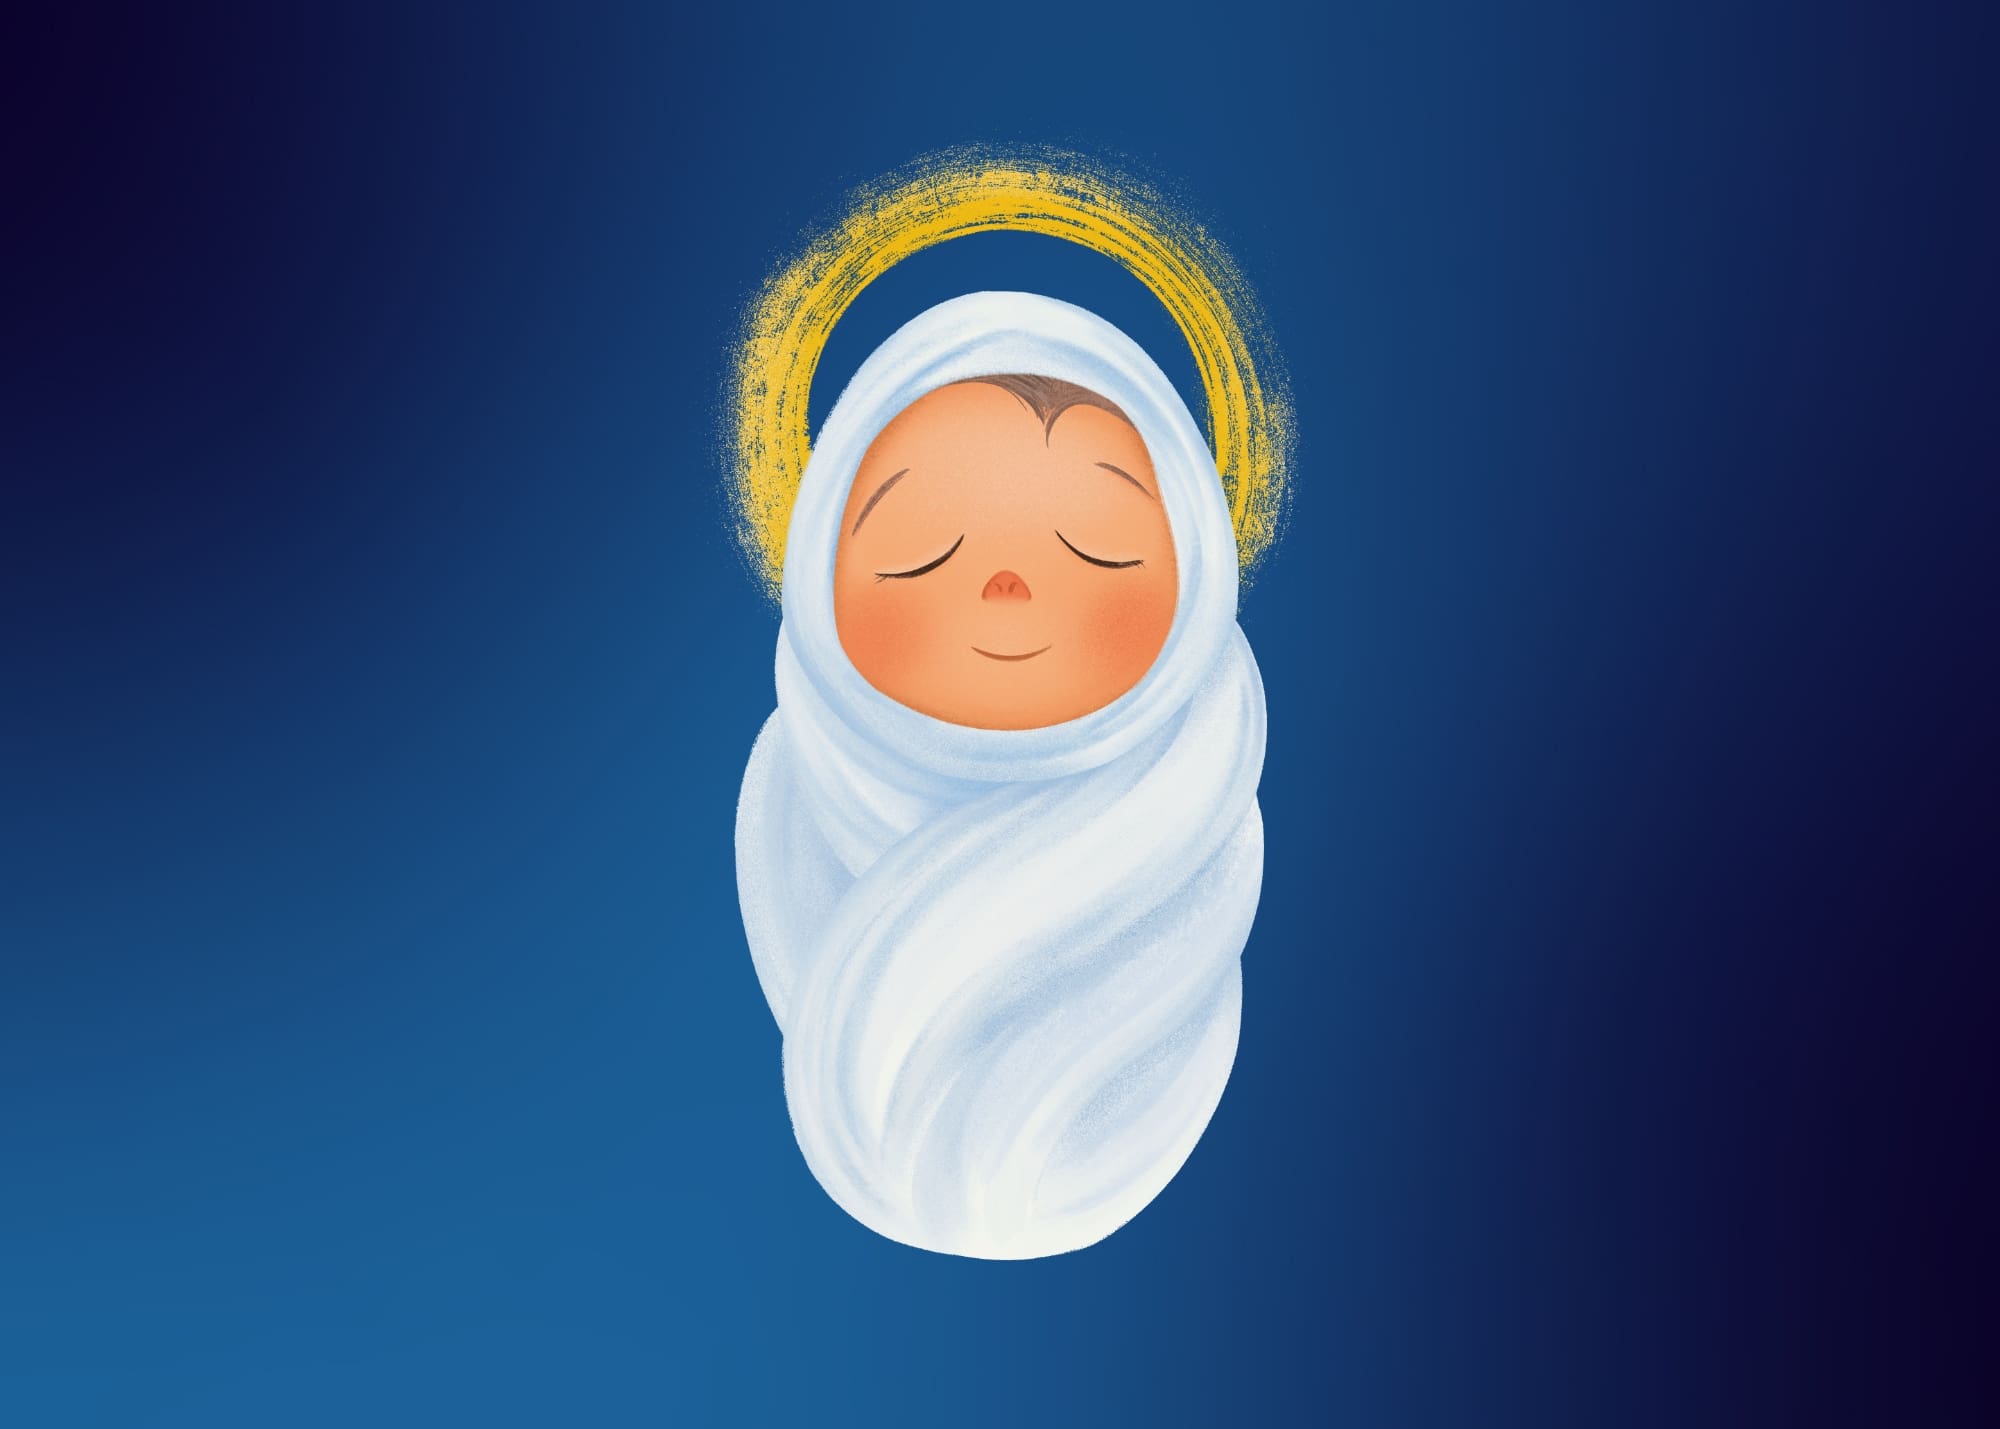 Cartoon baby Jesus, swaddled and his head is wreathed in a halo.